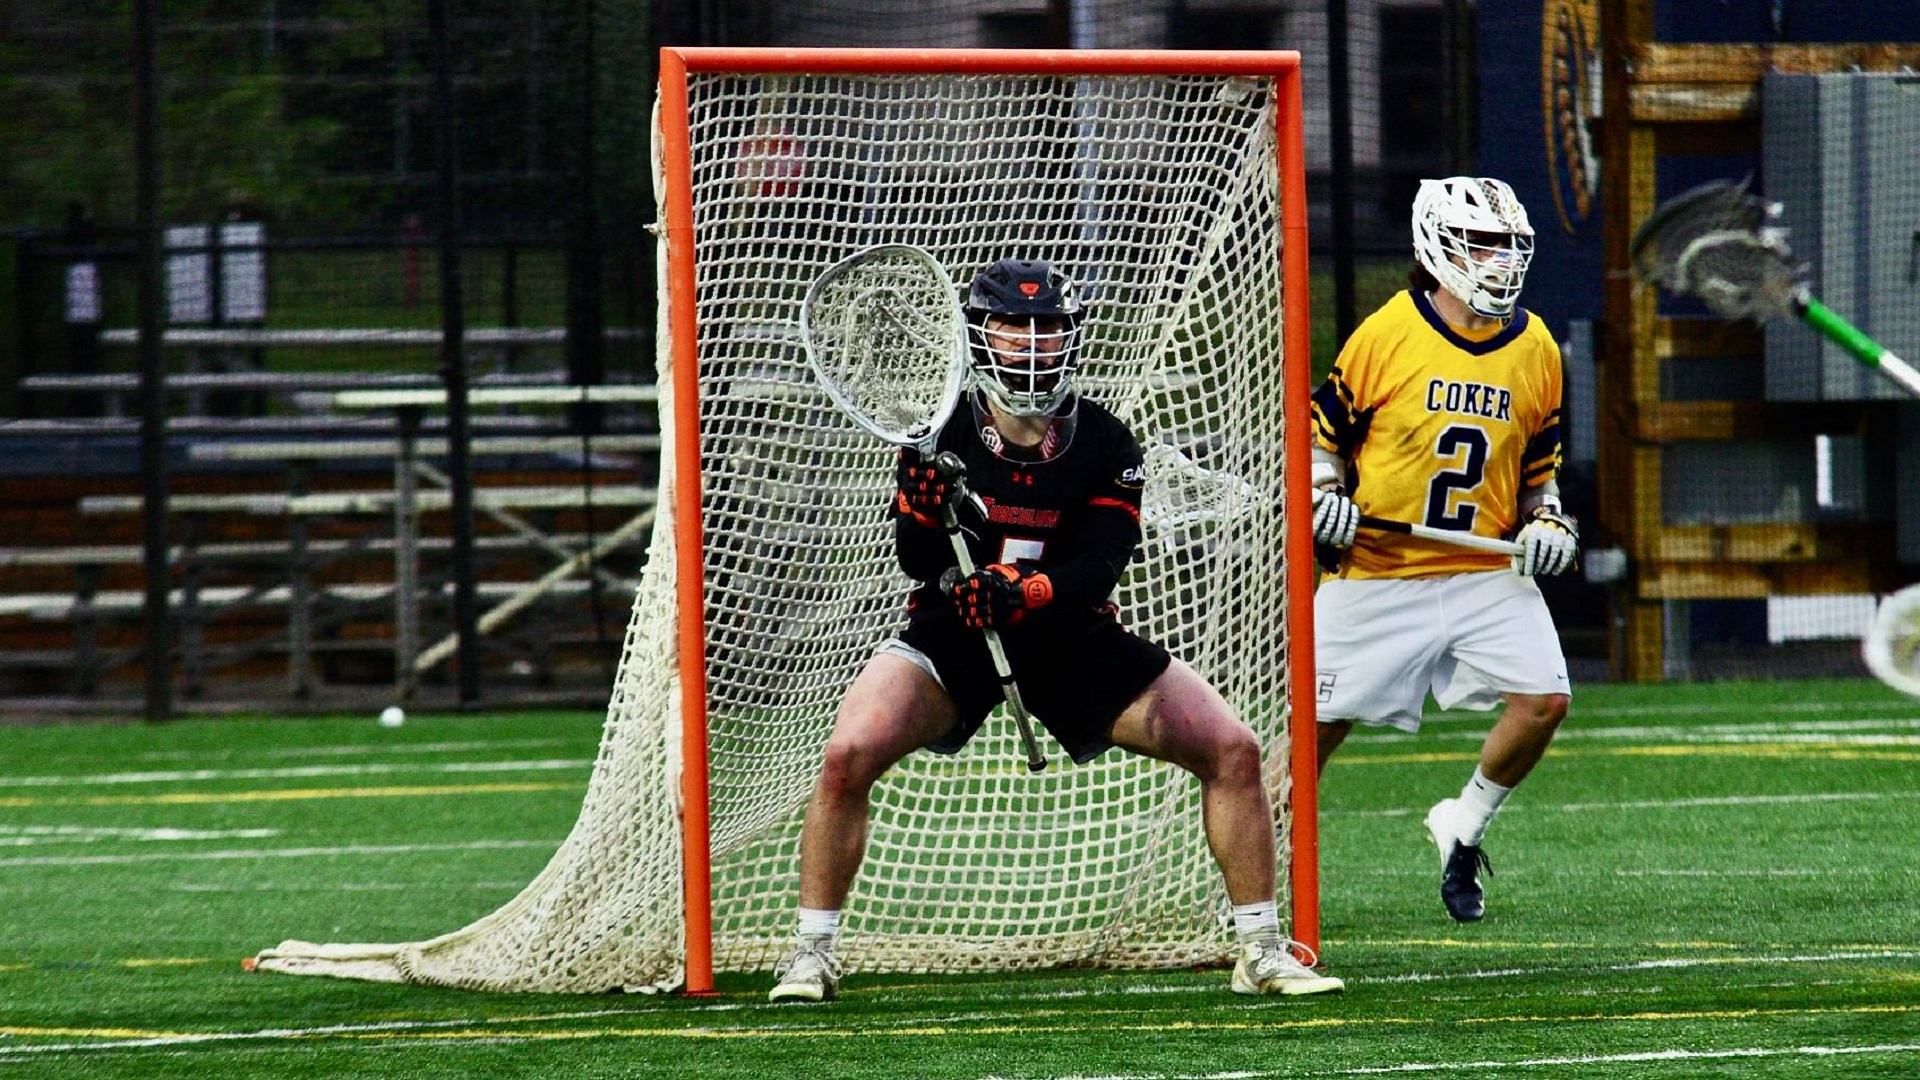 Riley Semmes finished with 16 saves at Coker (photo by Chris Lenker)